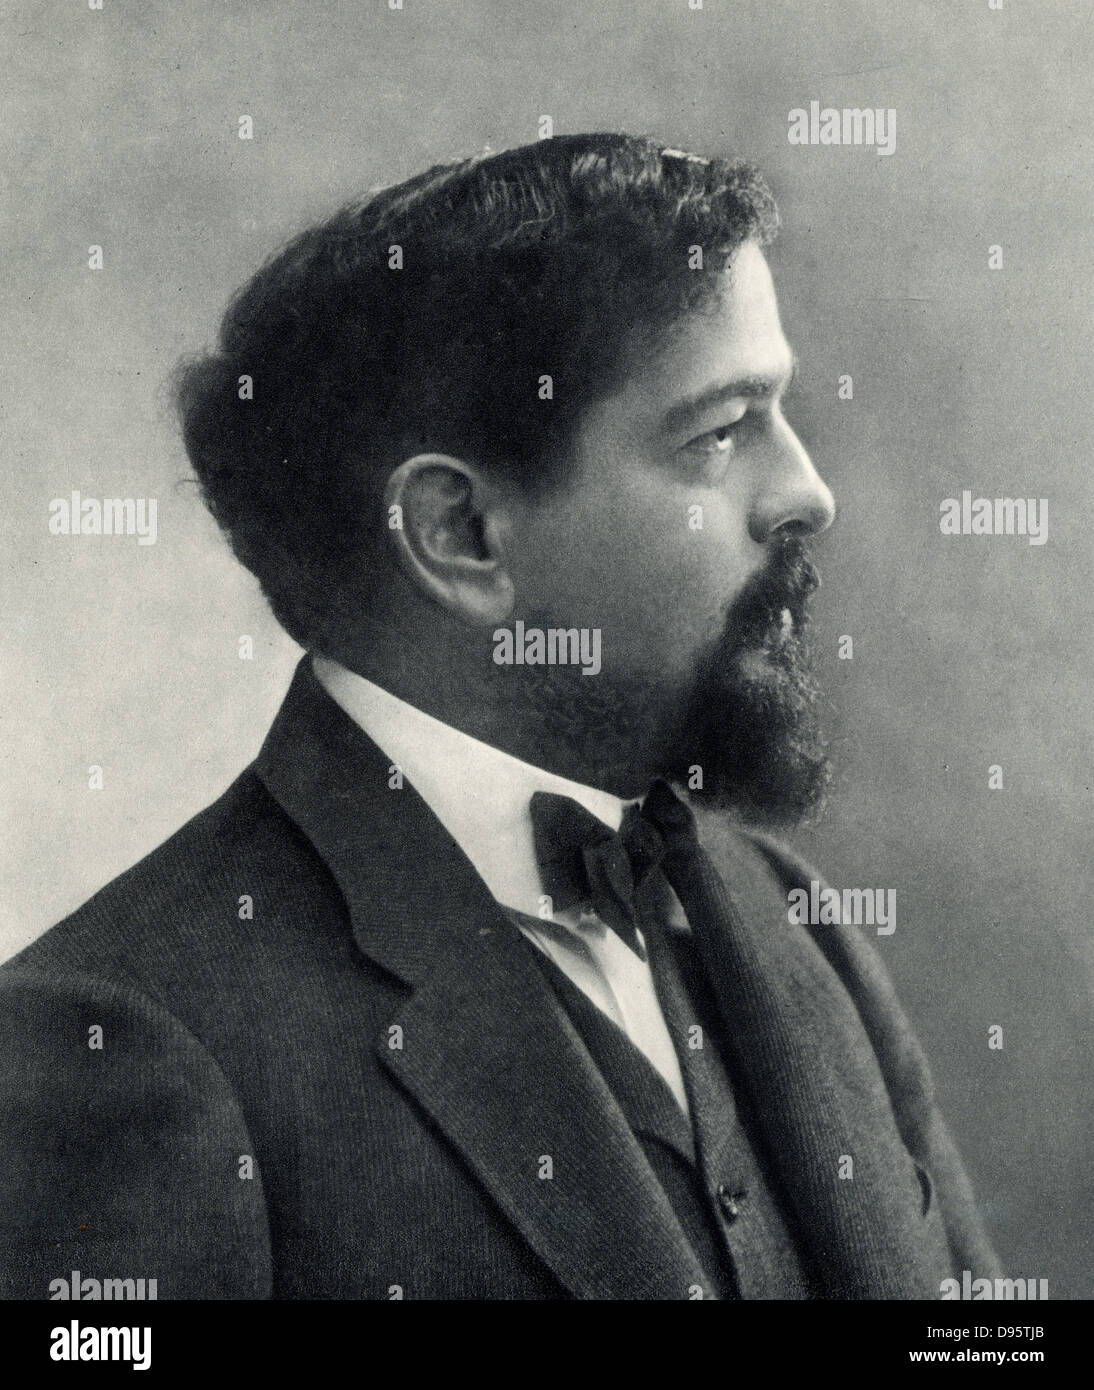 (Achille) Claude Debussy (1862-1919) French composer. From a photograph by Nadar, pseudonym of Gaspard-Felix Tournachon (1820-1910). Stock Photo